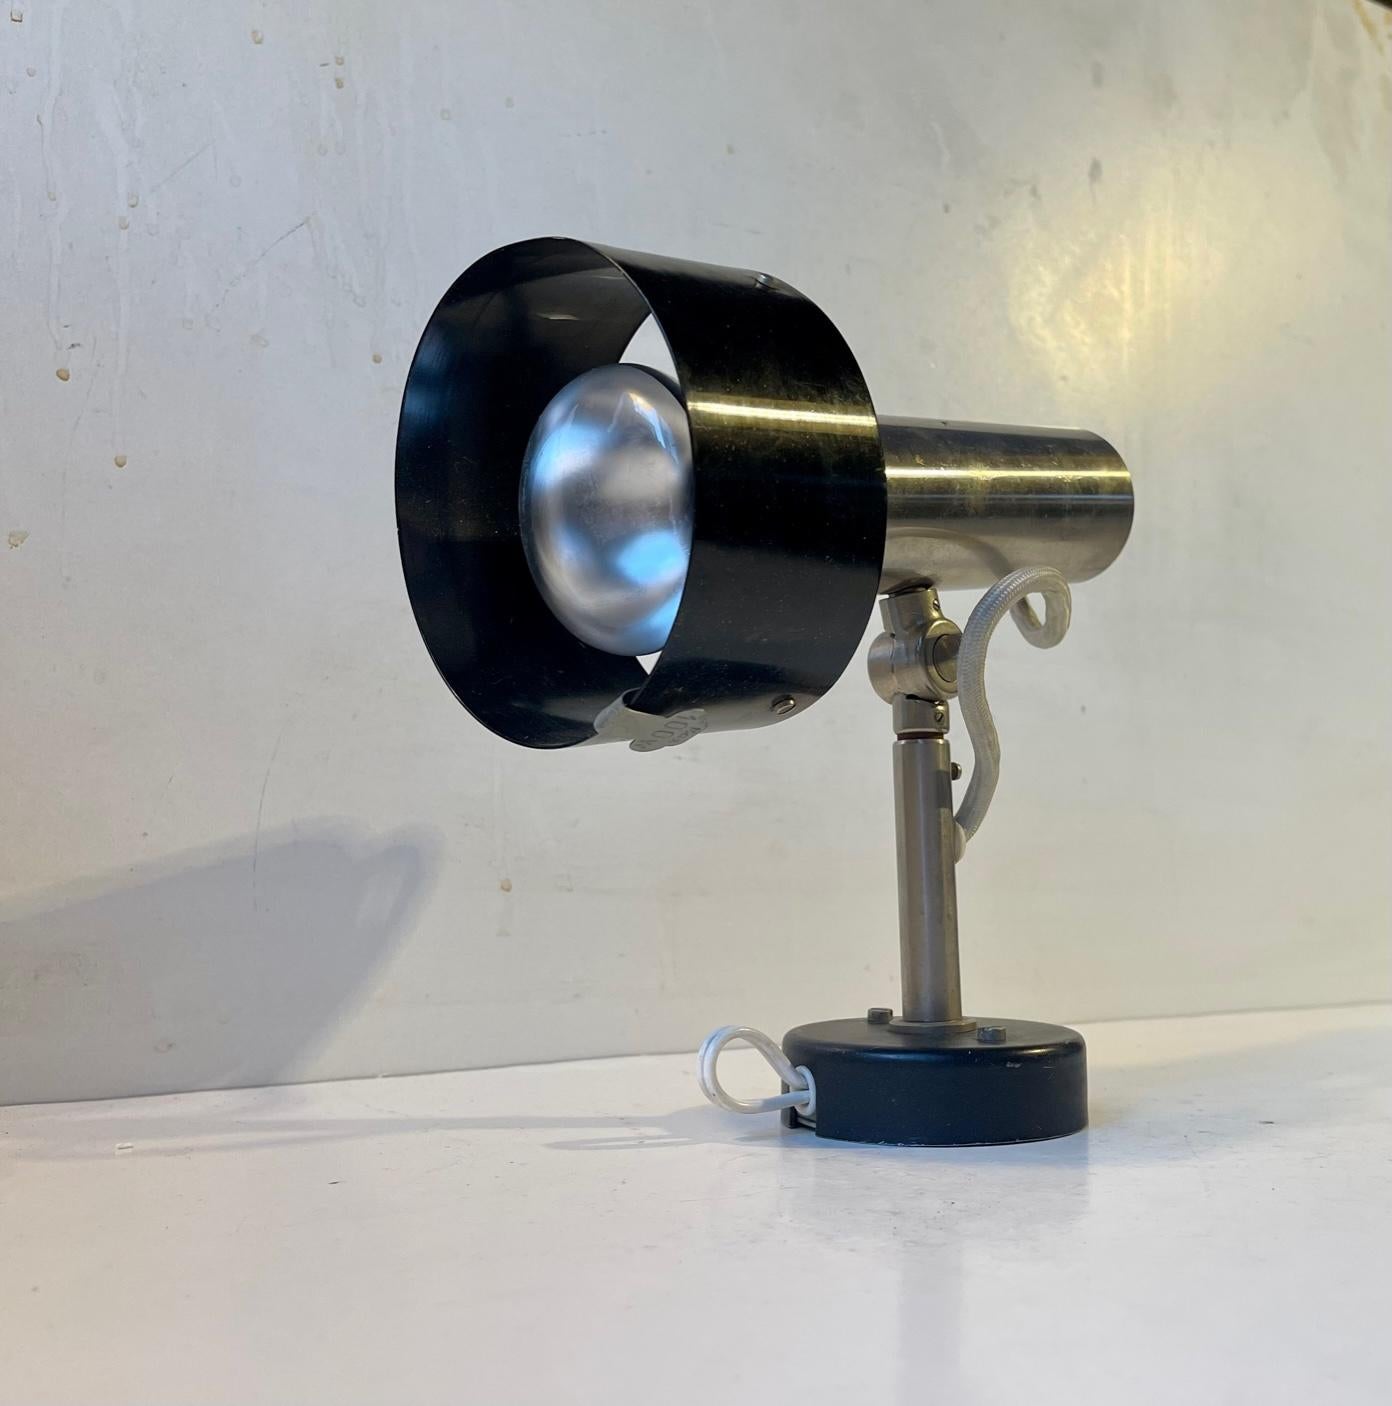 Some Danish auction houses attributes the design of this adjustable wall sconce to Preben Fabrisius and Jorgen Kastholm. Being manufactured by Nordisk Solar in Denmark this attribution it is rather plausible. However we have not been able to confirm